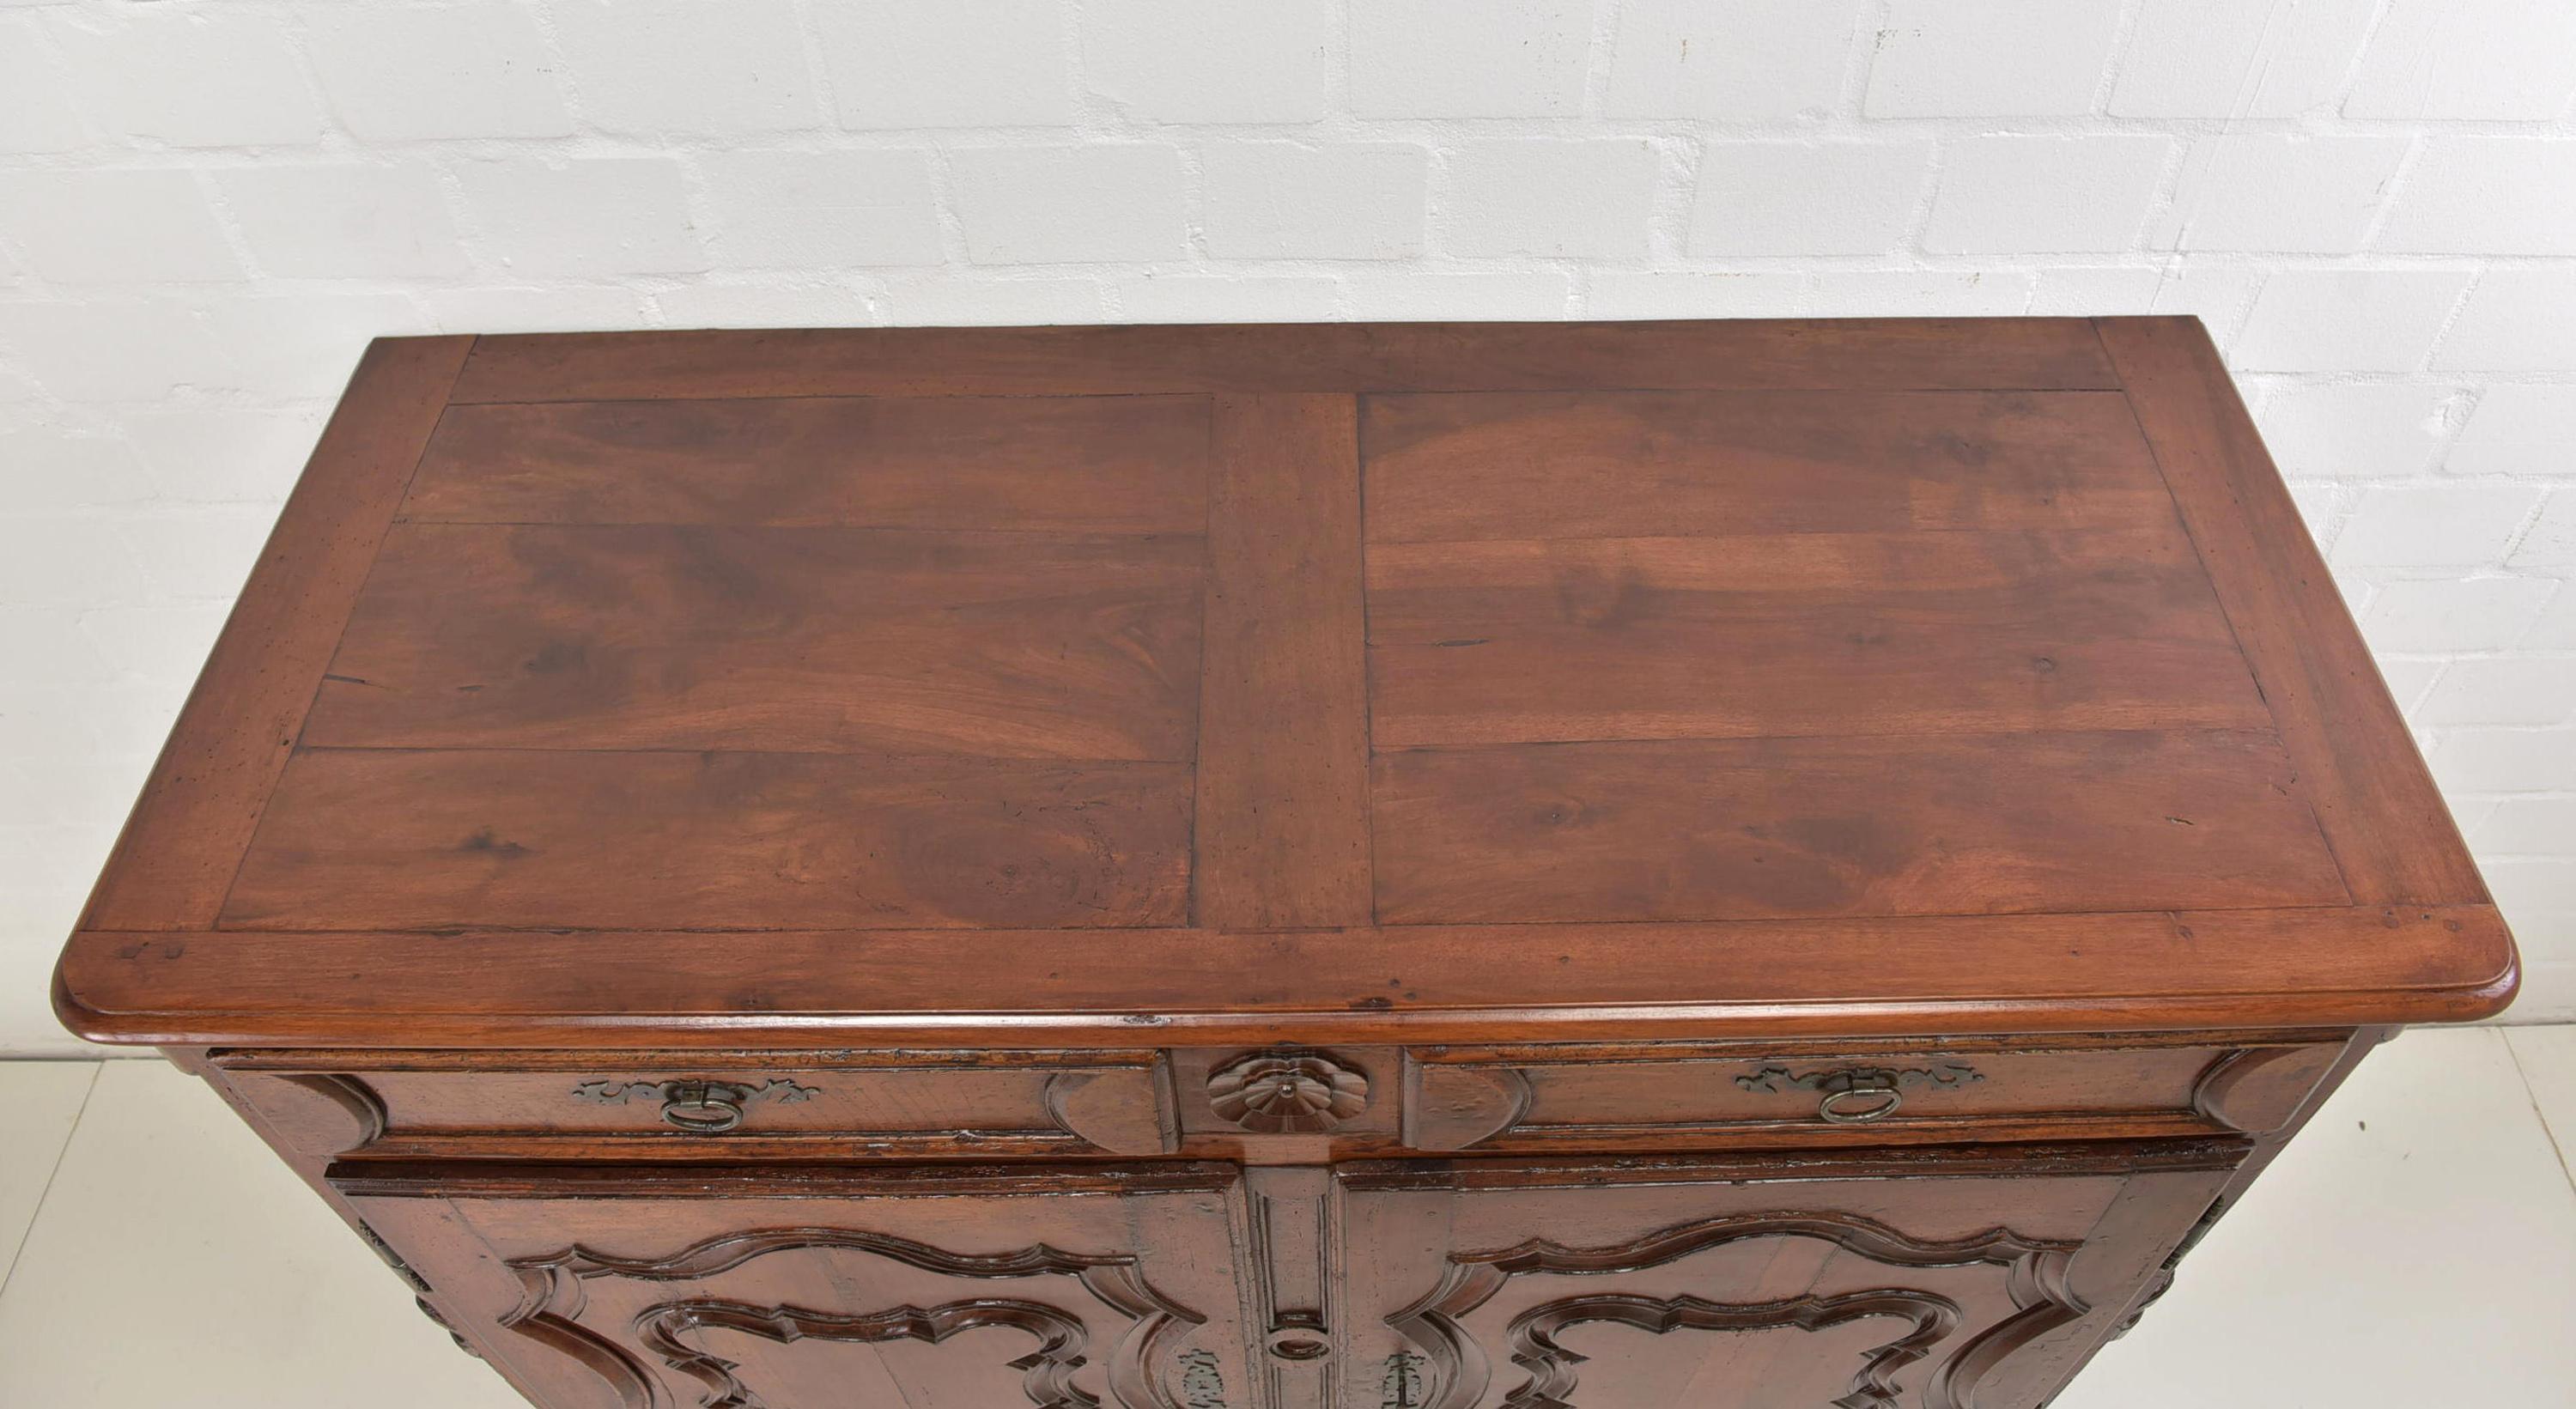 Rococo Louis XV Sideboard / Chest of Drawers / Dresser in Cherry Wood, 1760 For Sale 2